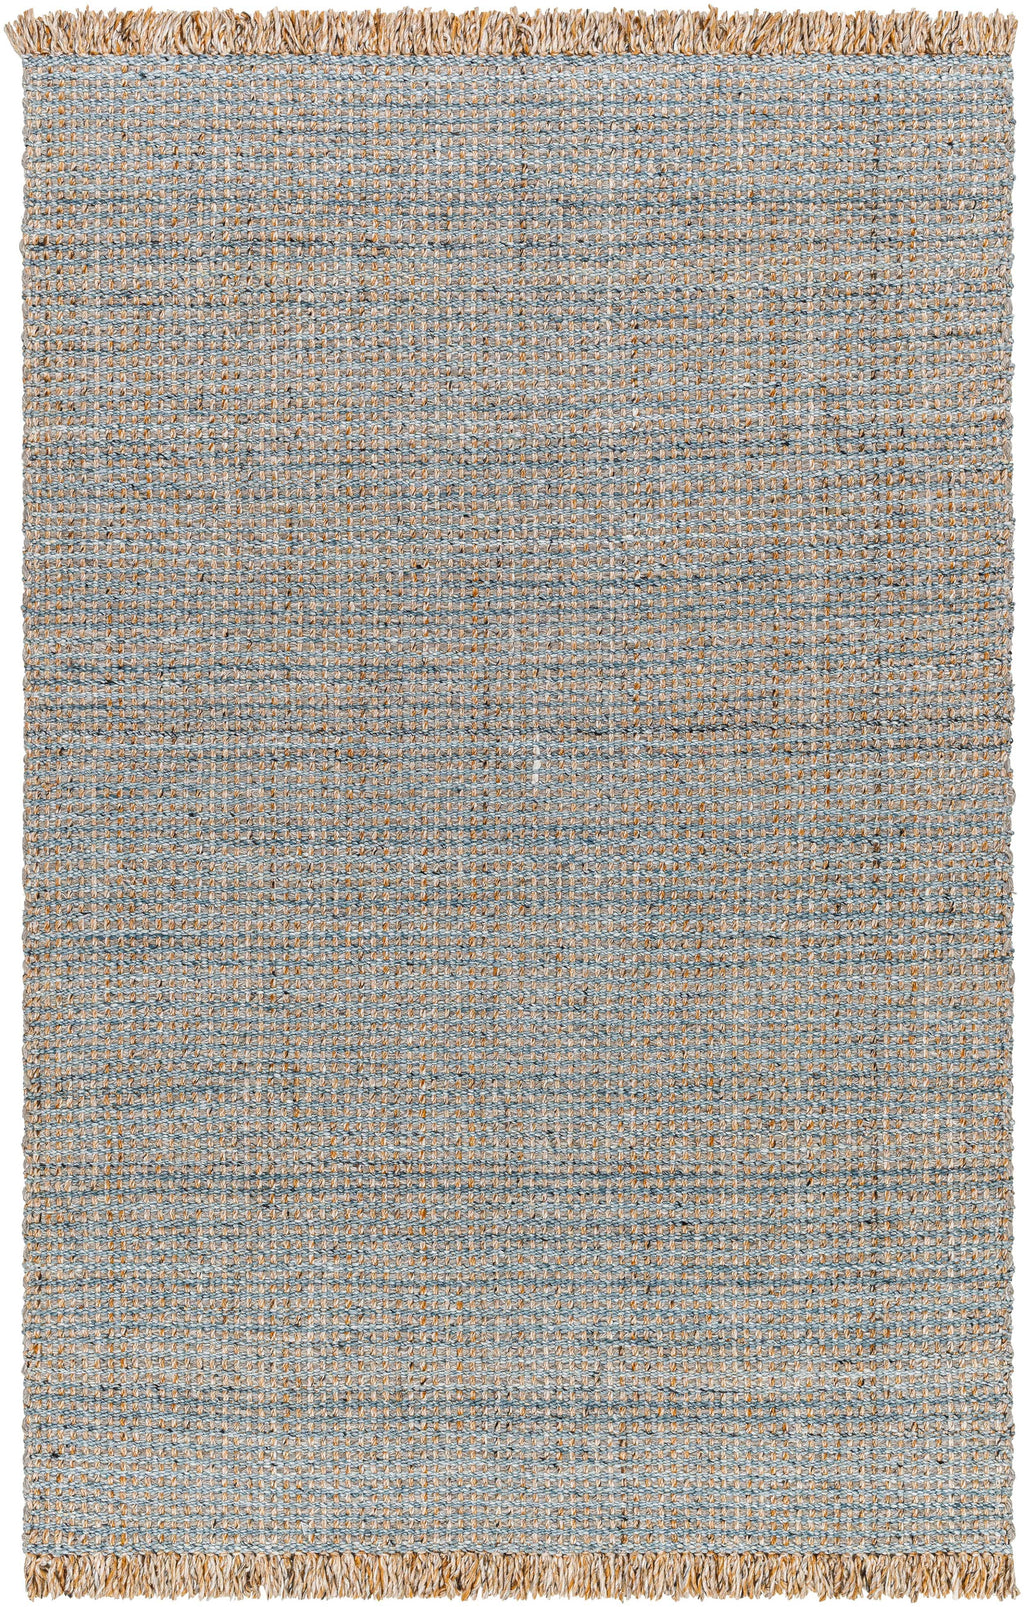 Palisades Rug - Blue and Tan - Swatch